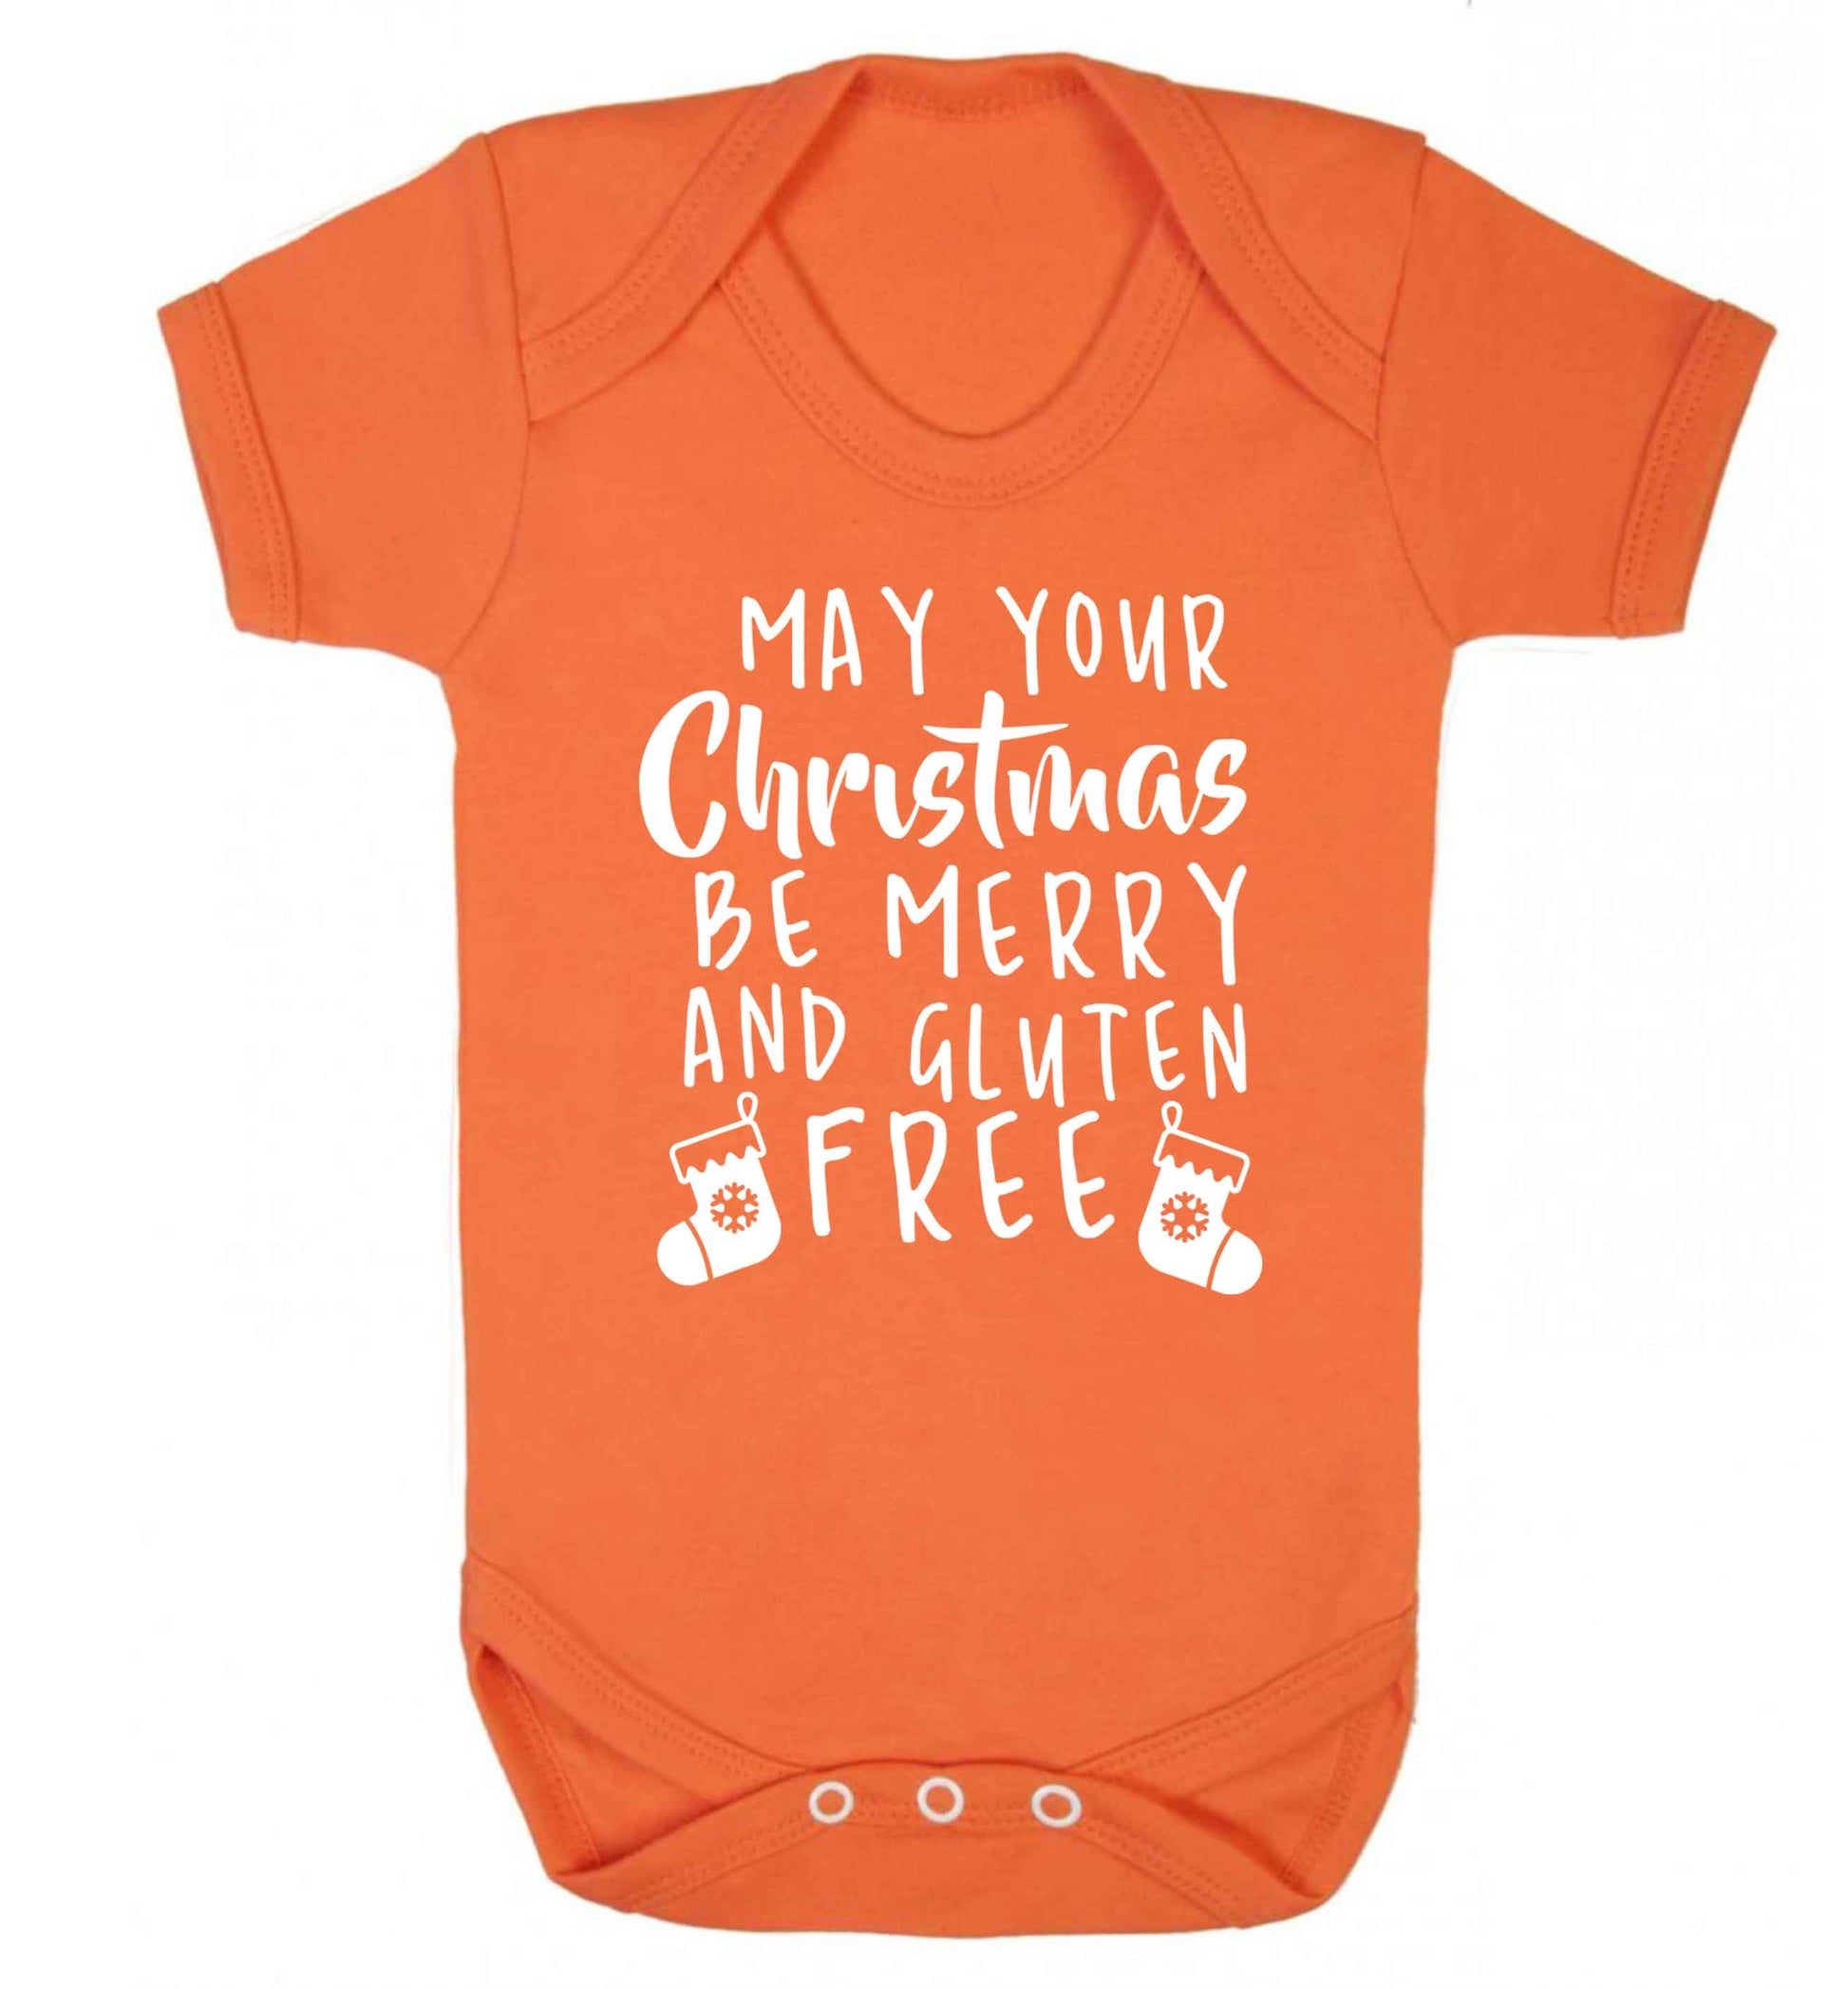 May your Christmas be merry and gluten free Baby Vest orange 18-24 months